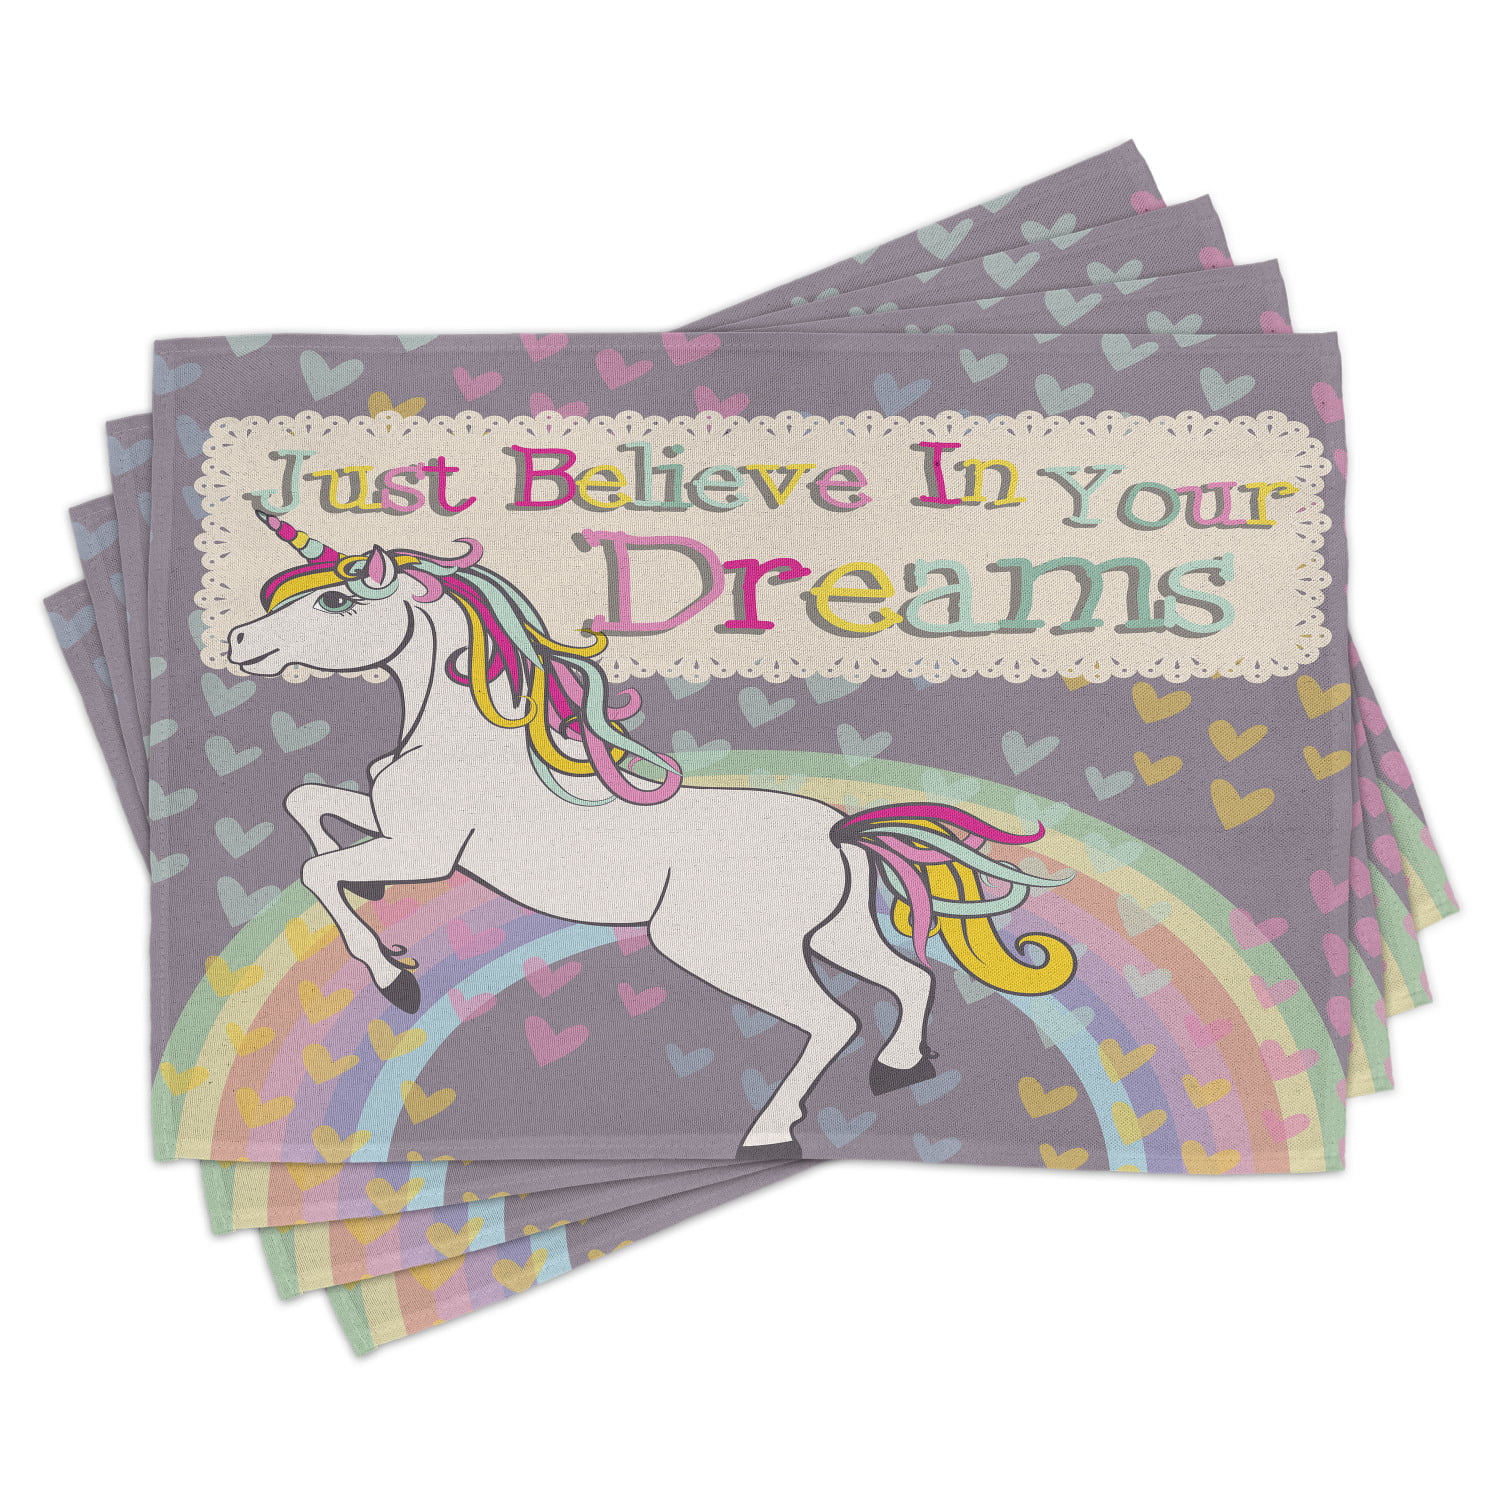 Unicorn Placemats Set of 4 Ambesonne Washable Fabric Place Mats for Table Decor 